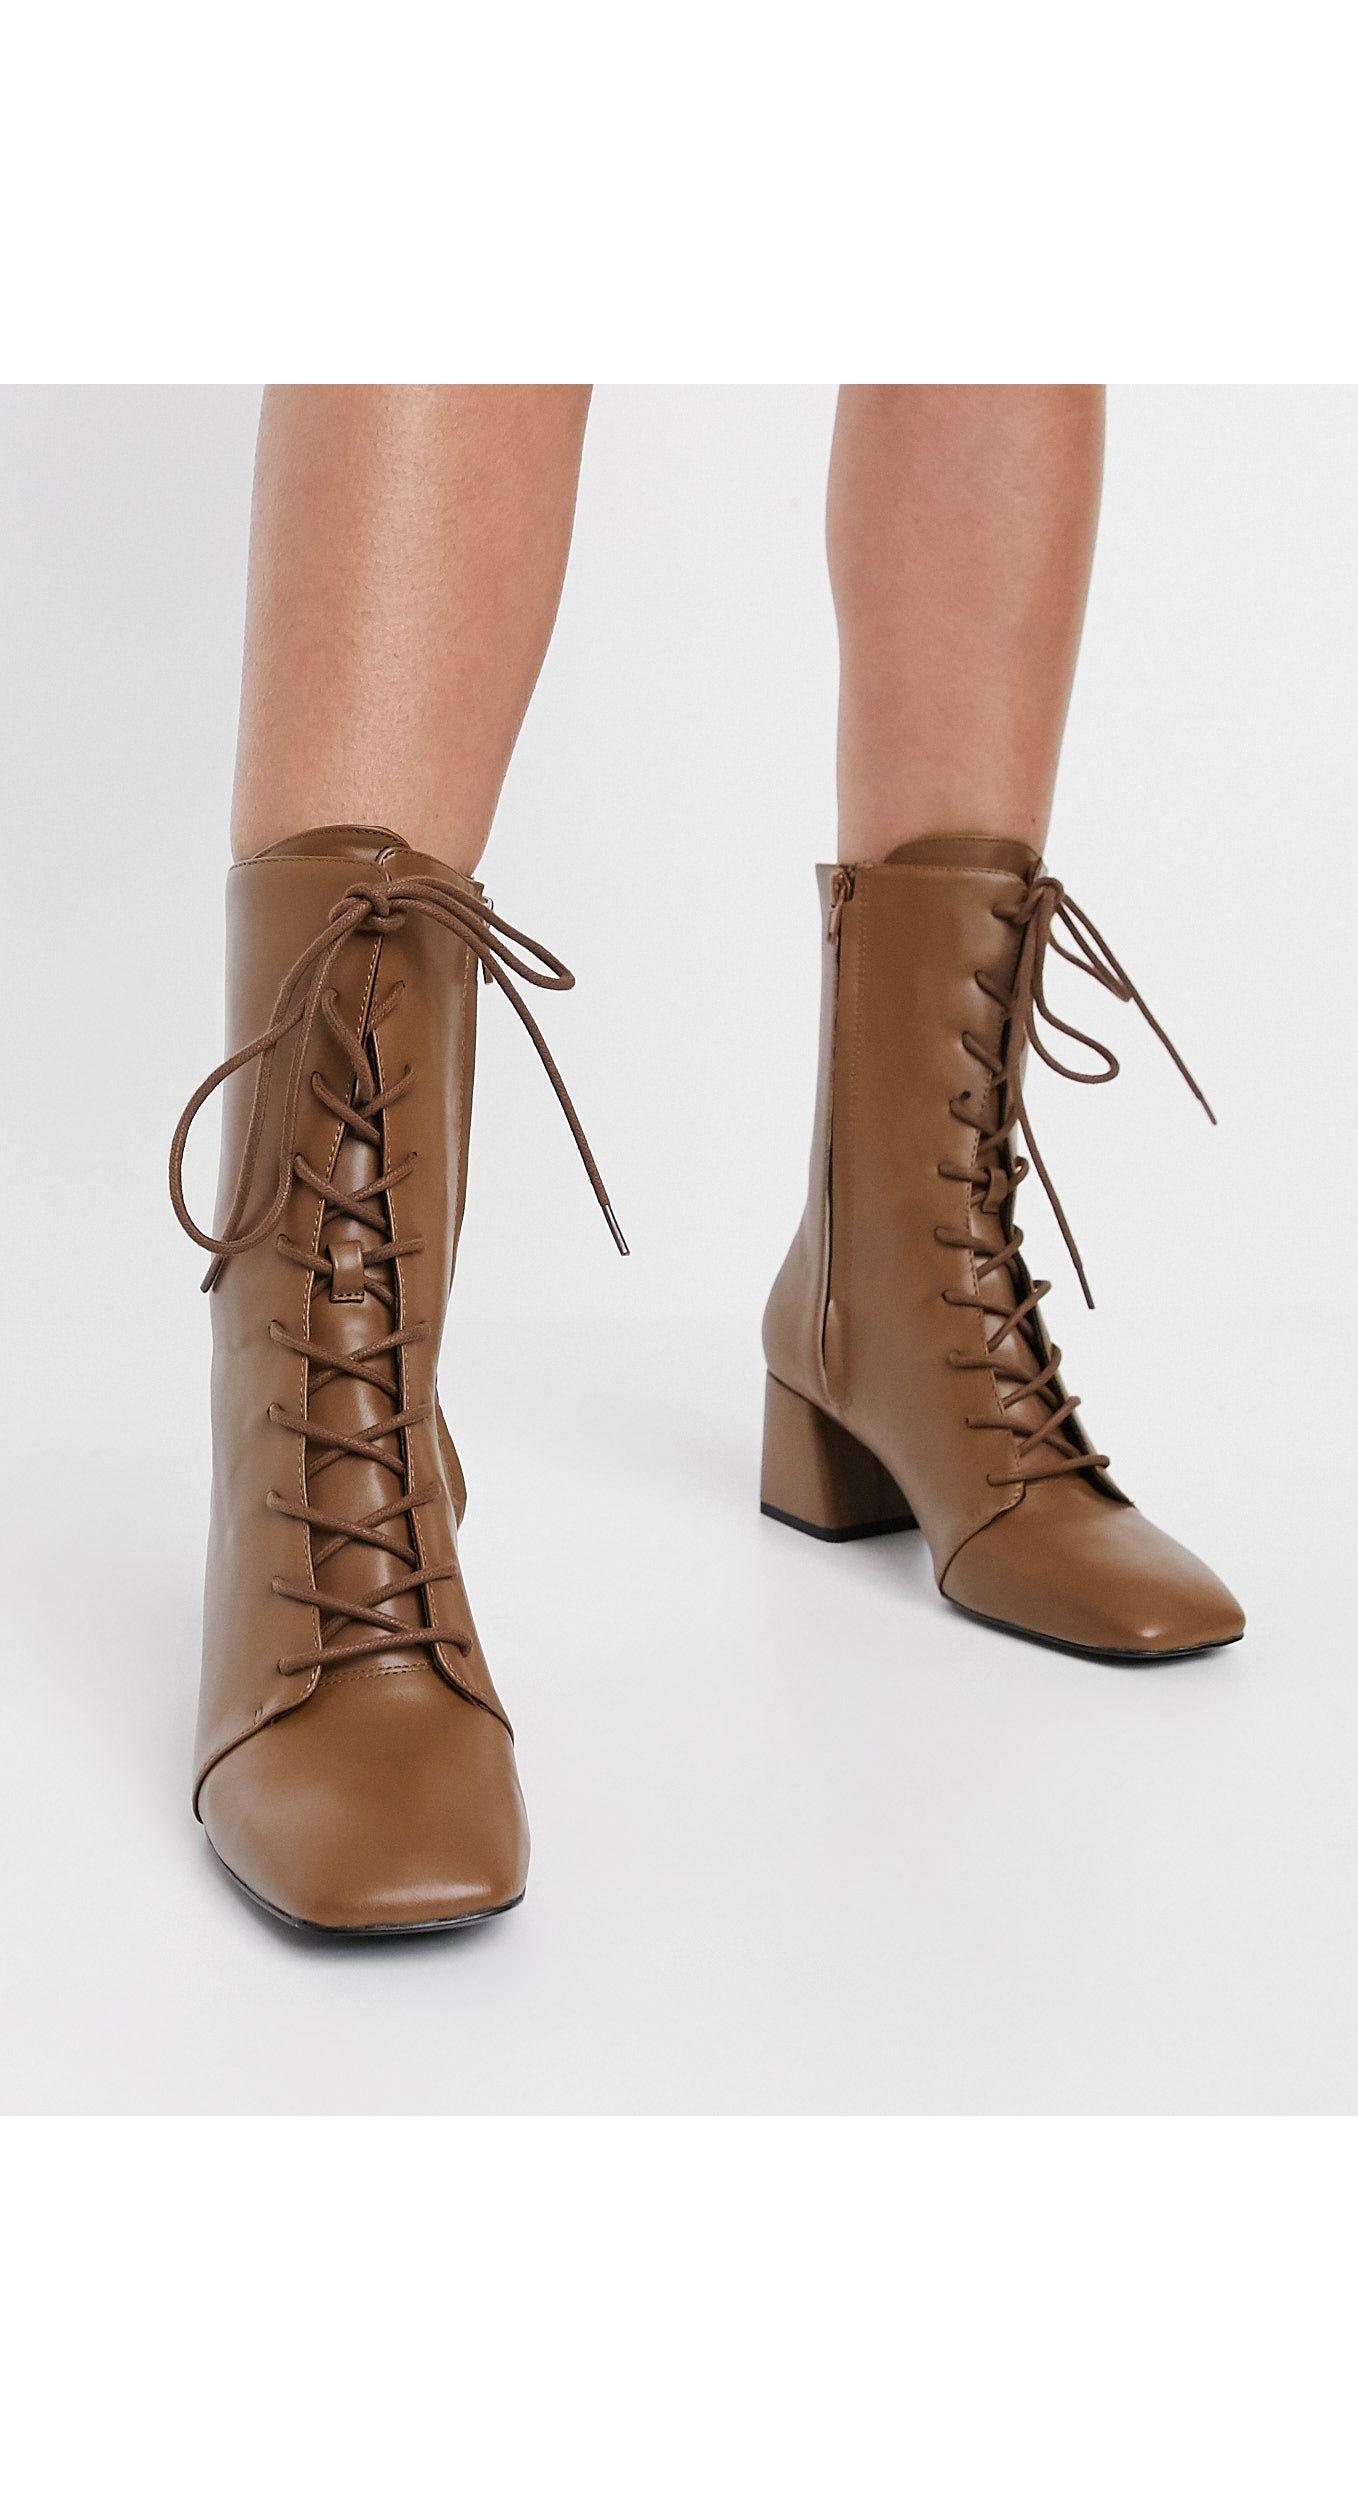 Monki Thelma Vegan Leather Lace Up Heeled Boot in Brown | Lyst